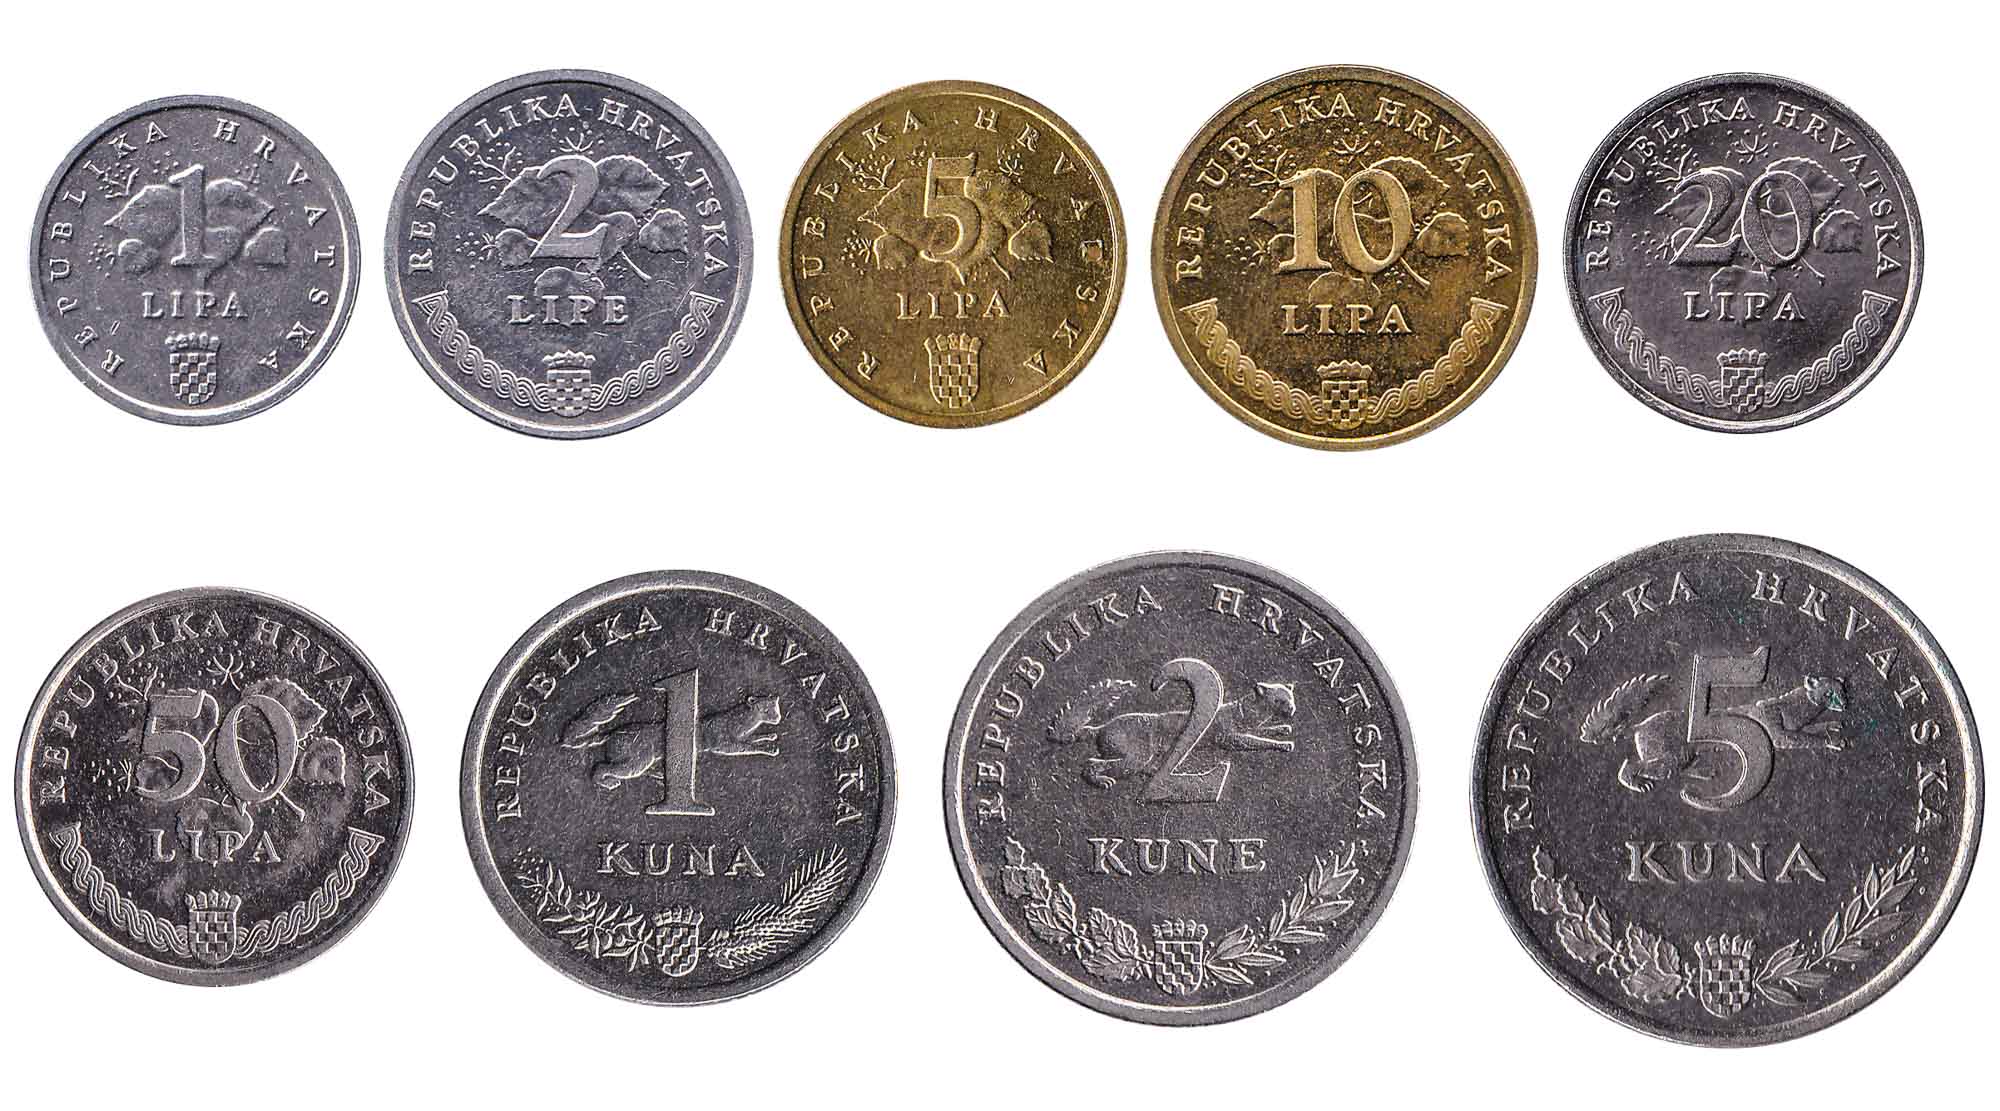 Croatian kuna coins accepted for exchange